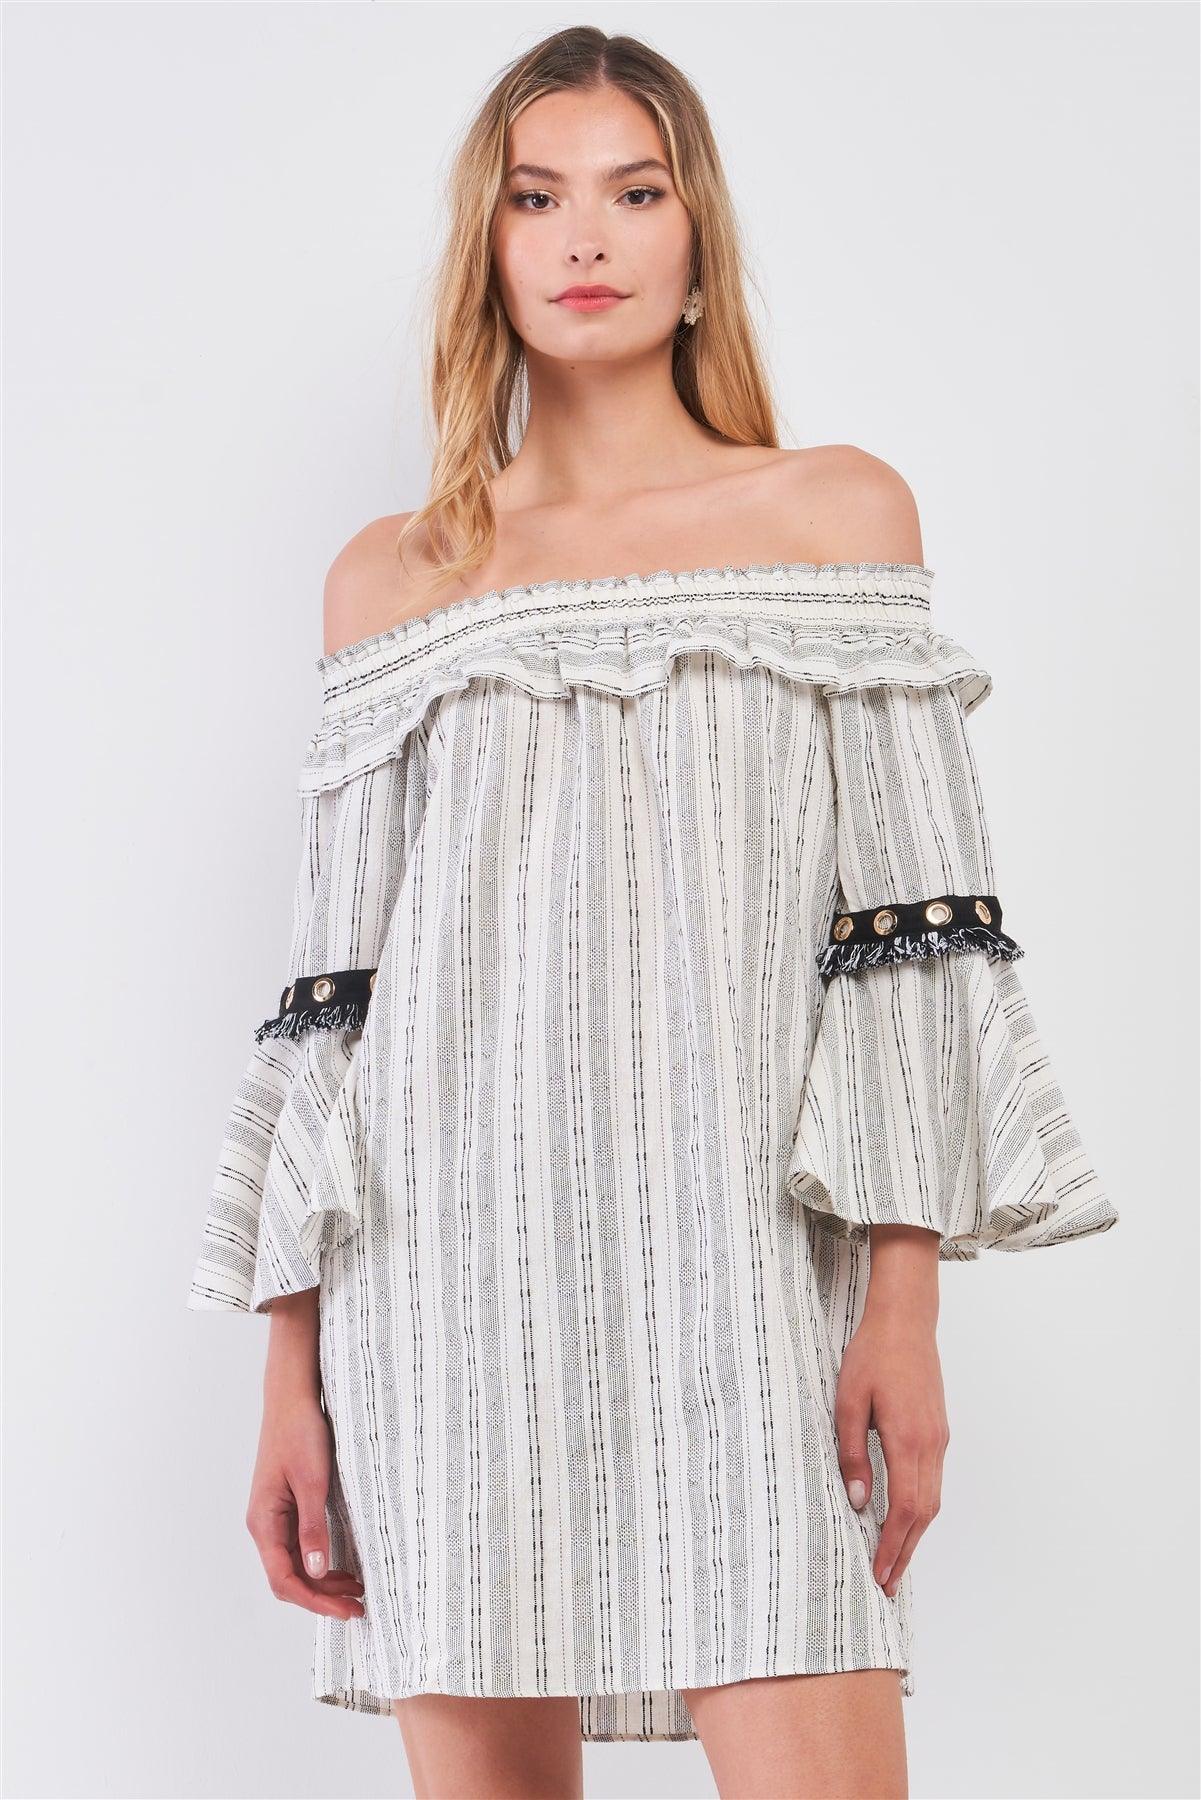 Off-White & Black Linen Striped Off-The-Shoulder 3/4 Bell Sleeve With Black Detail Mini Dress /1-2-2-1